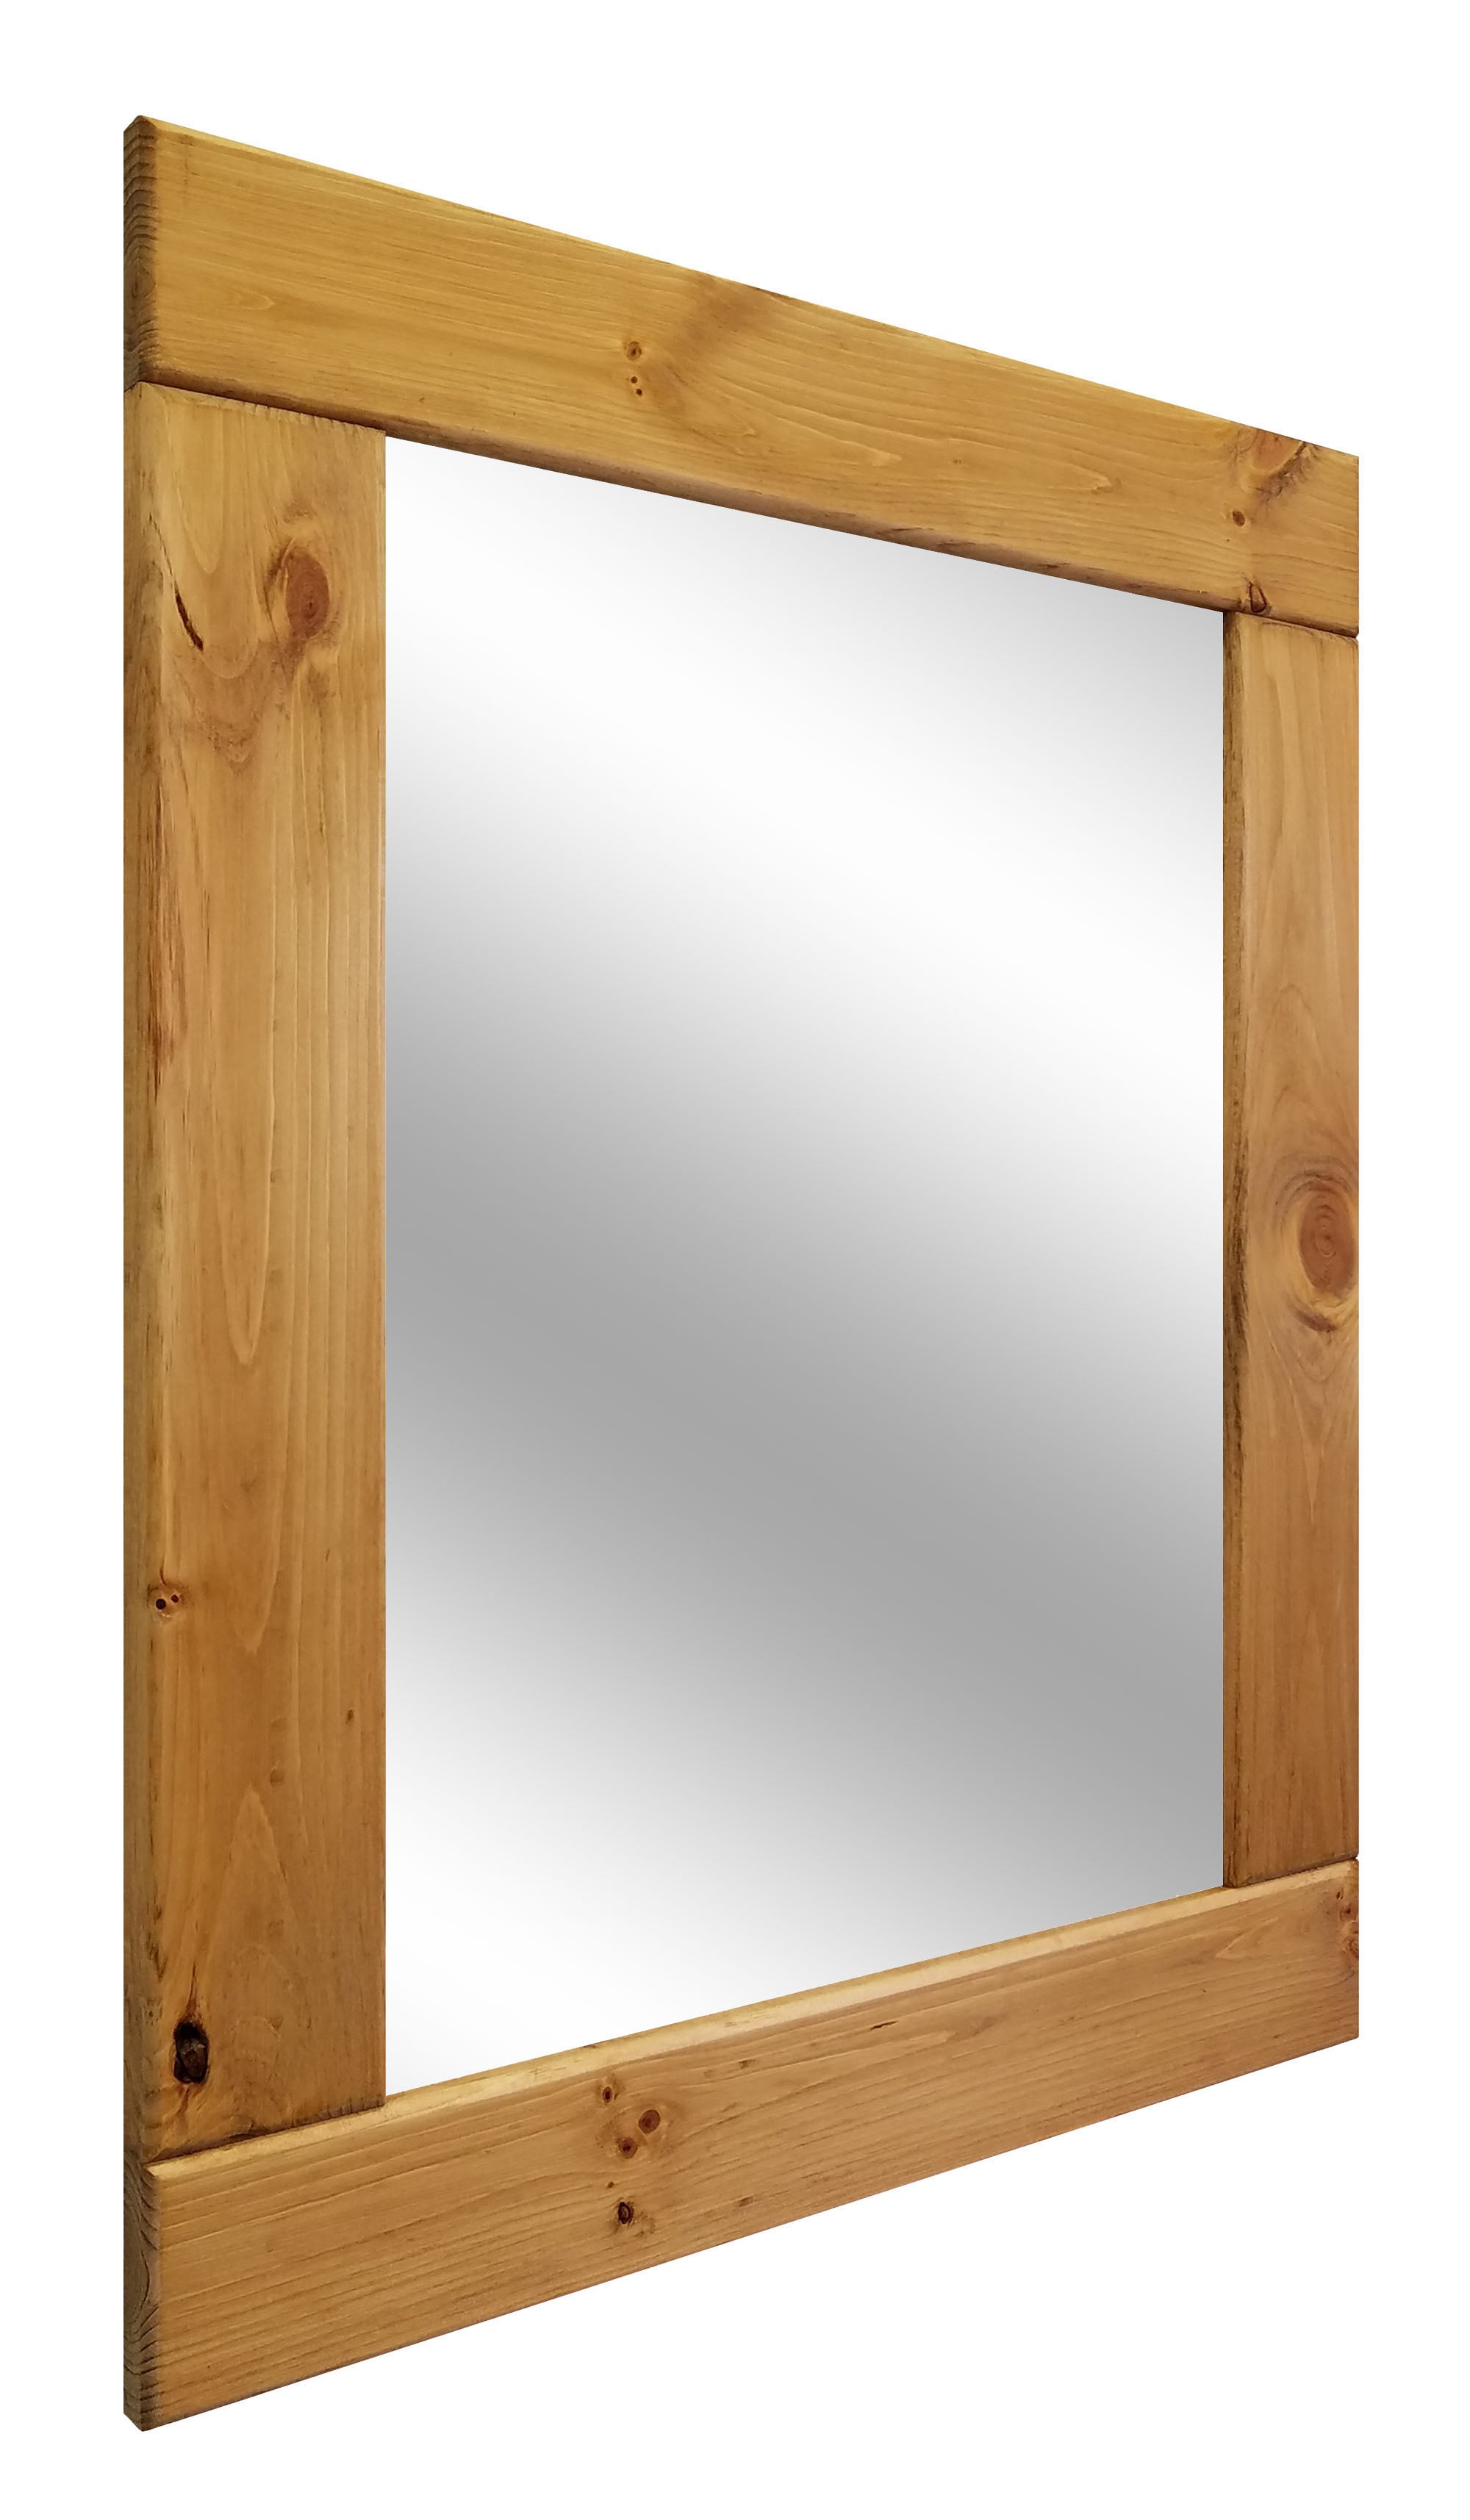 Natural Rustic Wood Framed Mirror, 20 Stain Colors - Shown In Puritan Pine